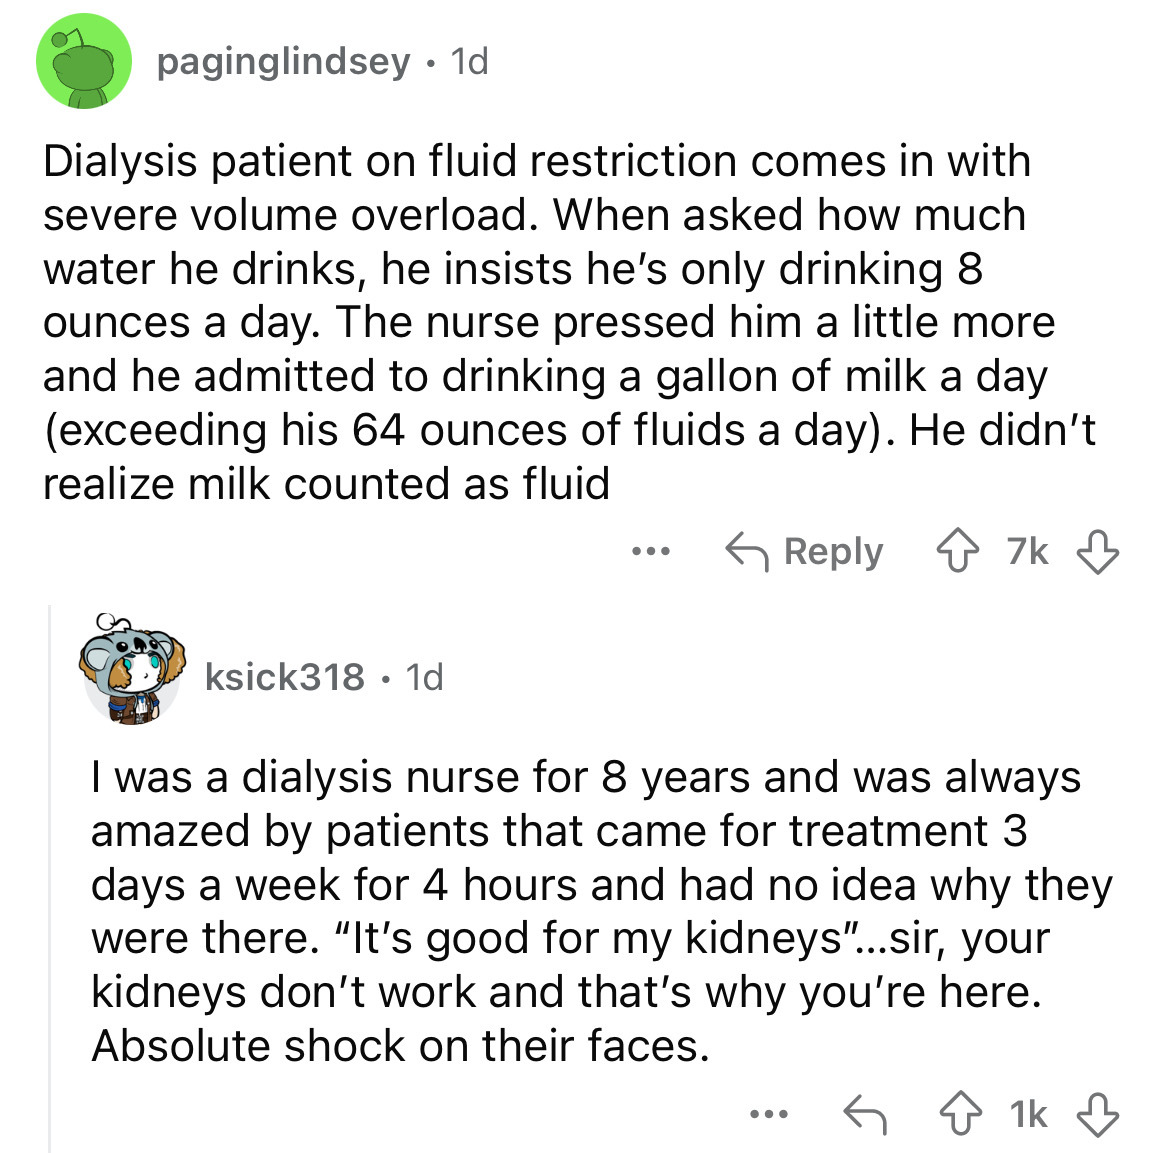 screenshot - paginglindsey 1d Dialysis patient on fluid restriction comes in with severe volume overload. When asked how much water he drinks, he insists he's only drinking 8 ounces a day. The nurse pressed him a little more and he admitted to drinking a 